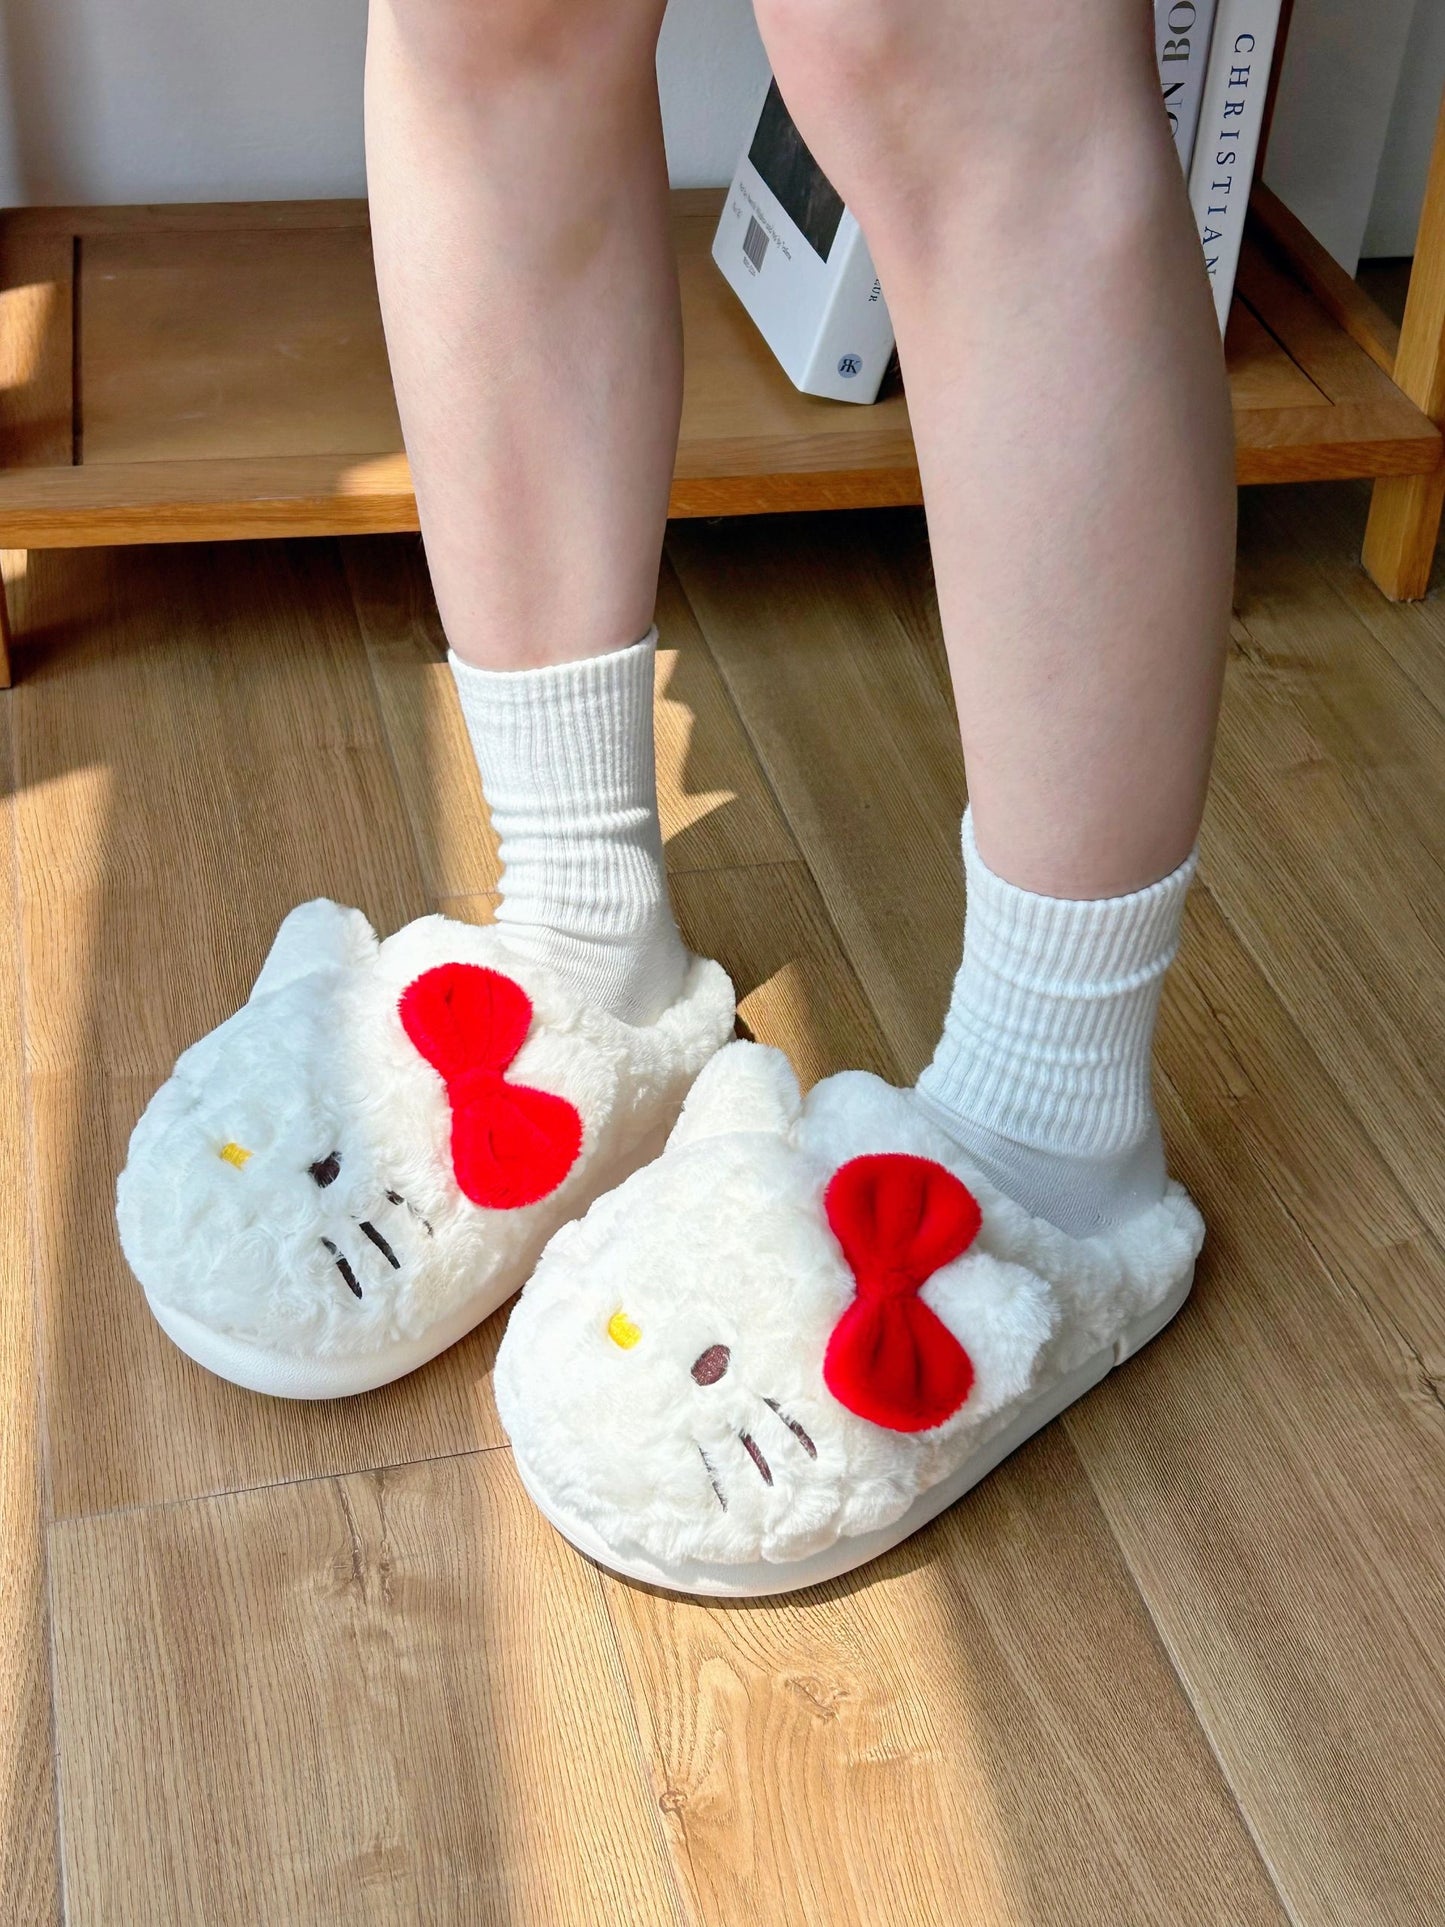 Sanrio Fuzzy Slippers House Slippers Winter Indoor Outdoor Slippers for Women